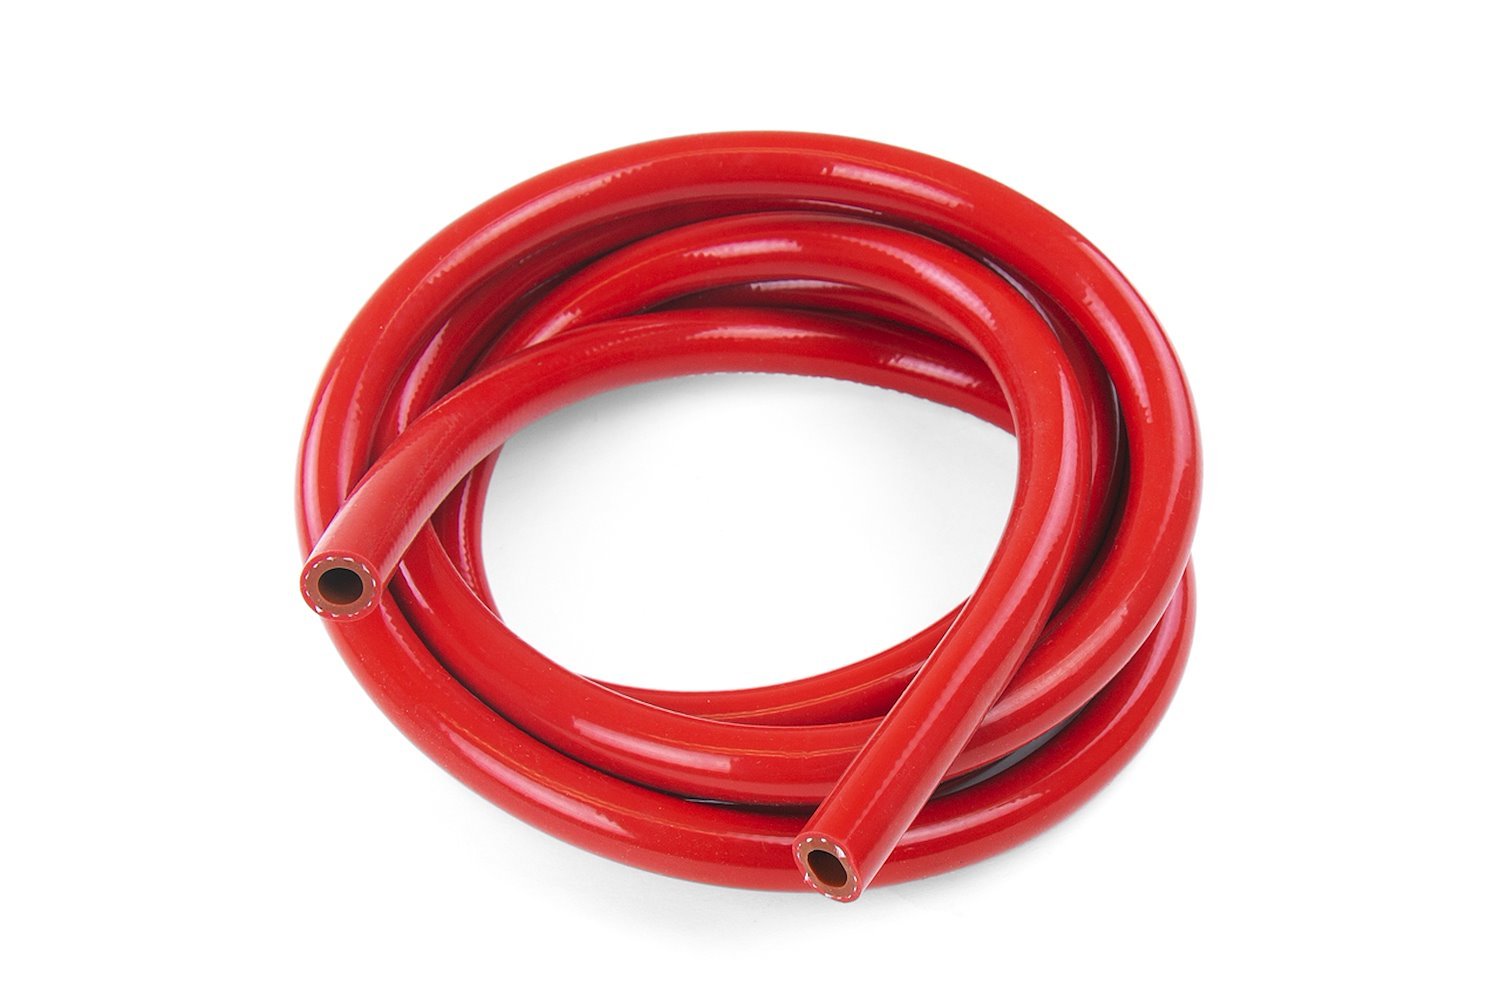 HTHH-087-REDx10 Silicone Heater Hose Tubing, High-Temp 1-Ply Reinforced, 7/8 in. ID, 10 ft. Roll, Red